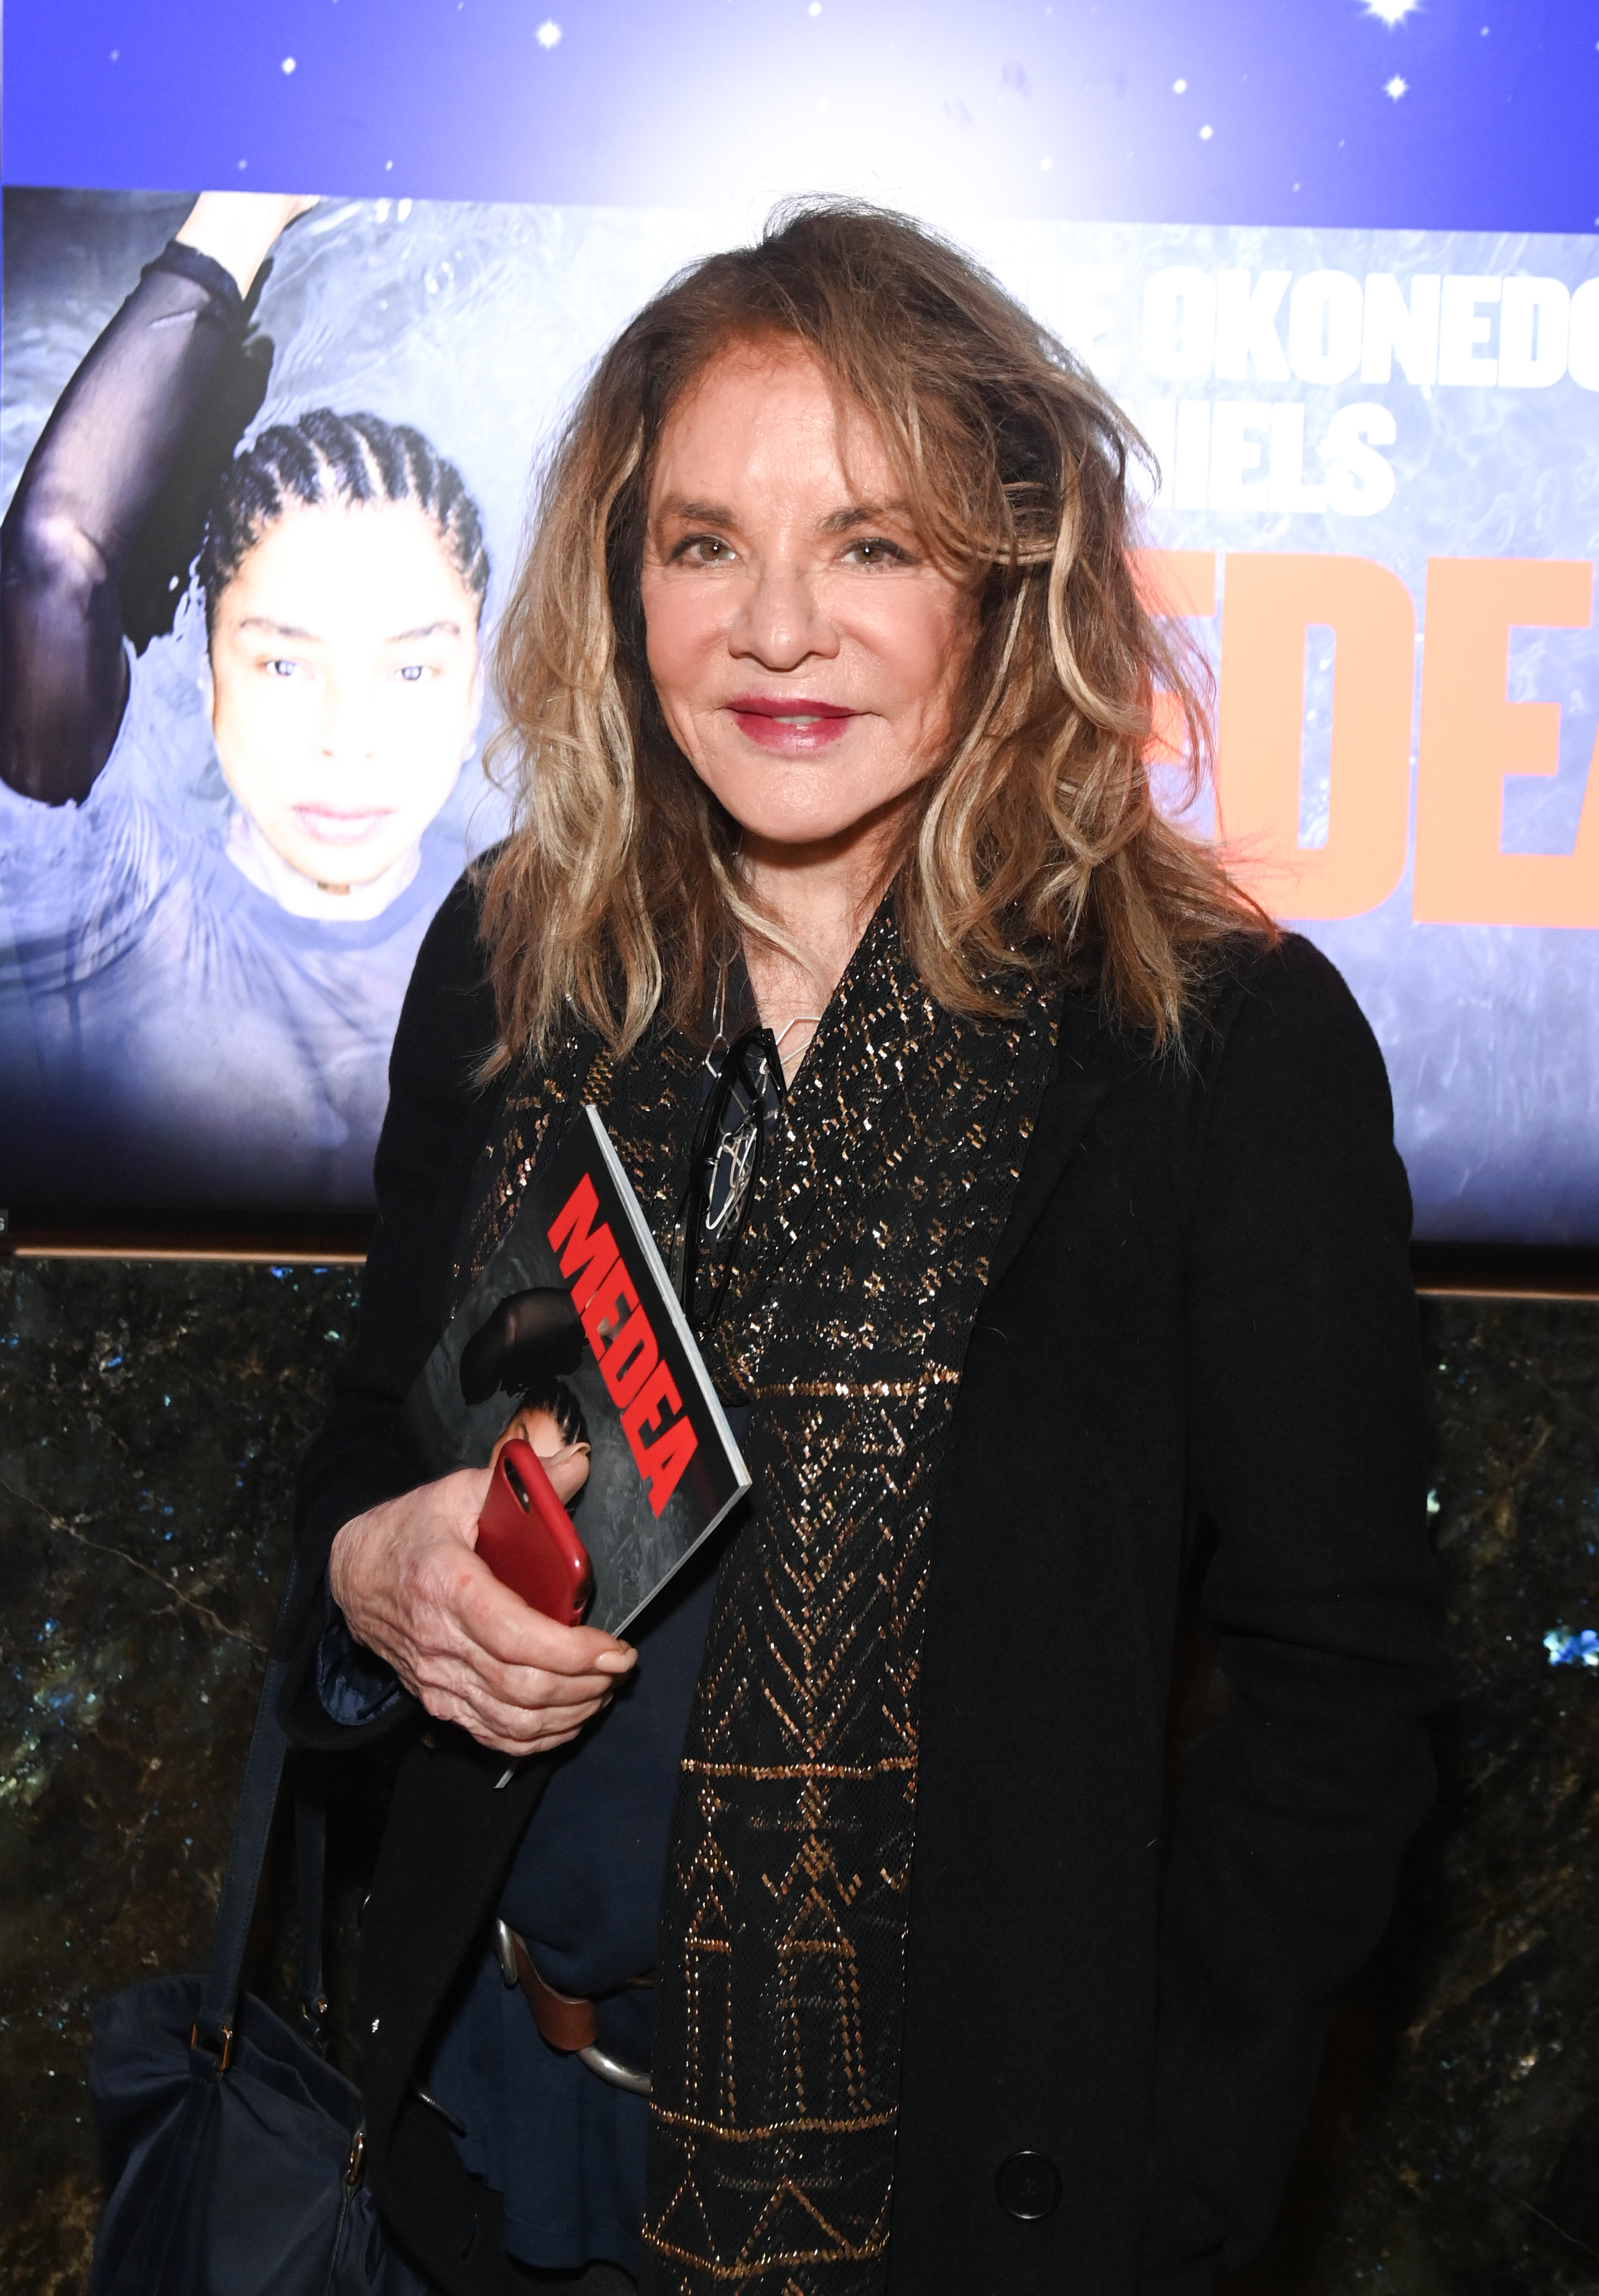 Stockard Channing attends the opening of "Medea" at new West End theatre on February 17, 2023 in London, England. | Source: Getty Images